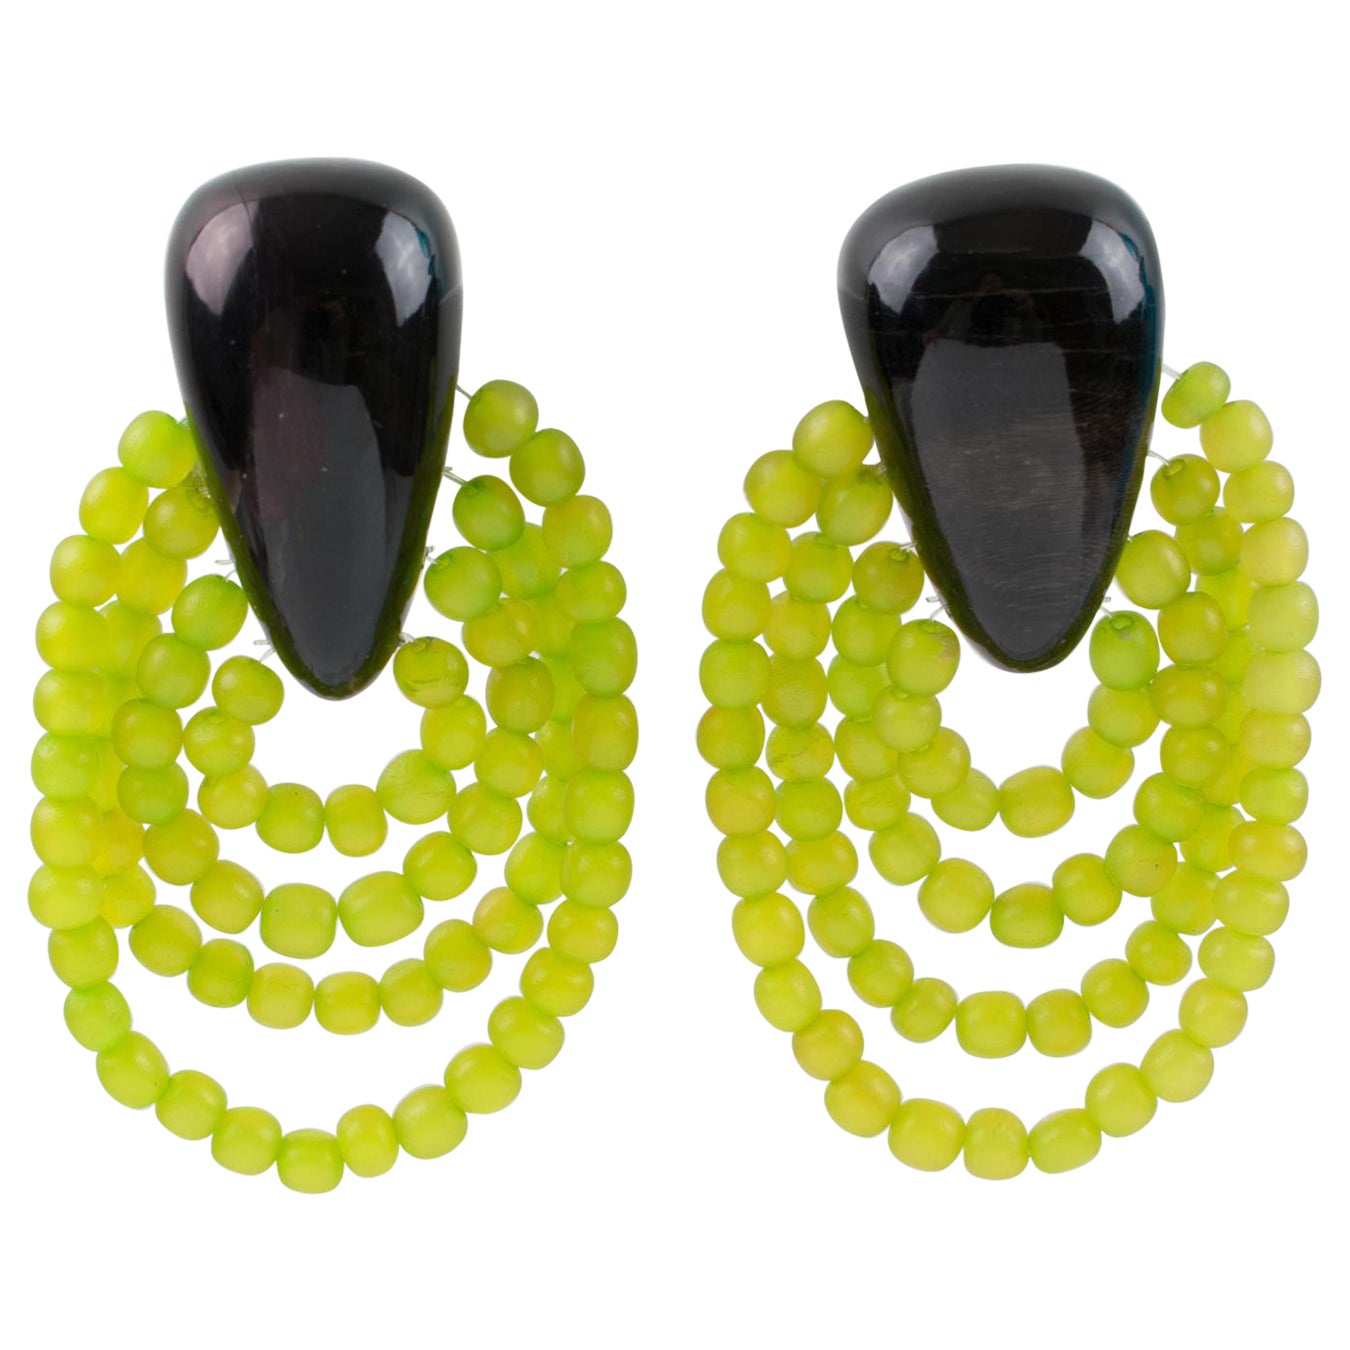 Monies Clip Earrings Resin and Green Glass Beads